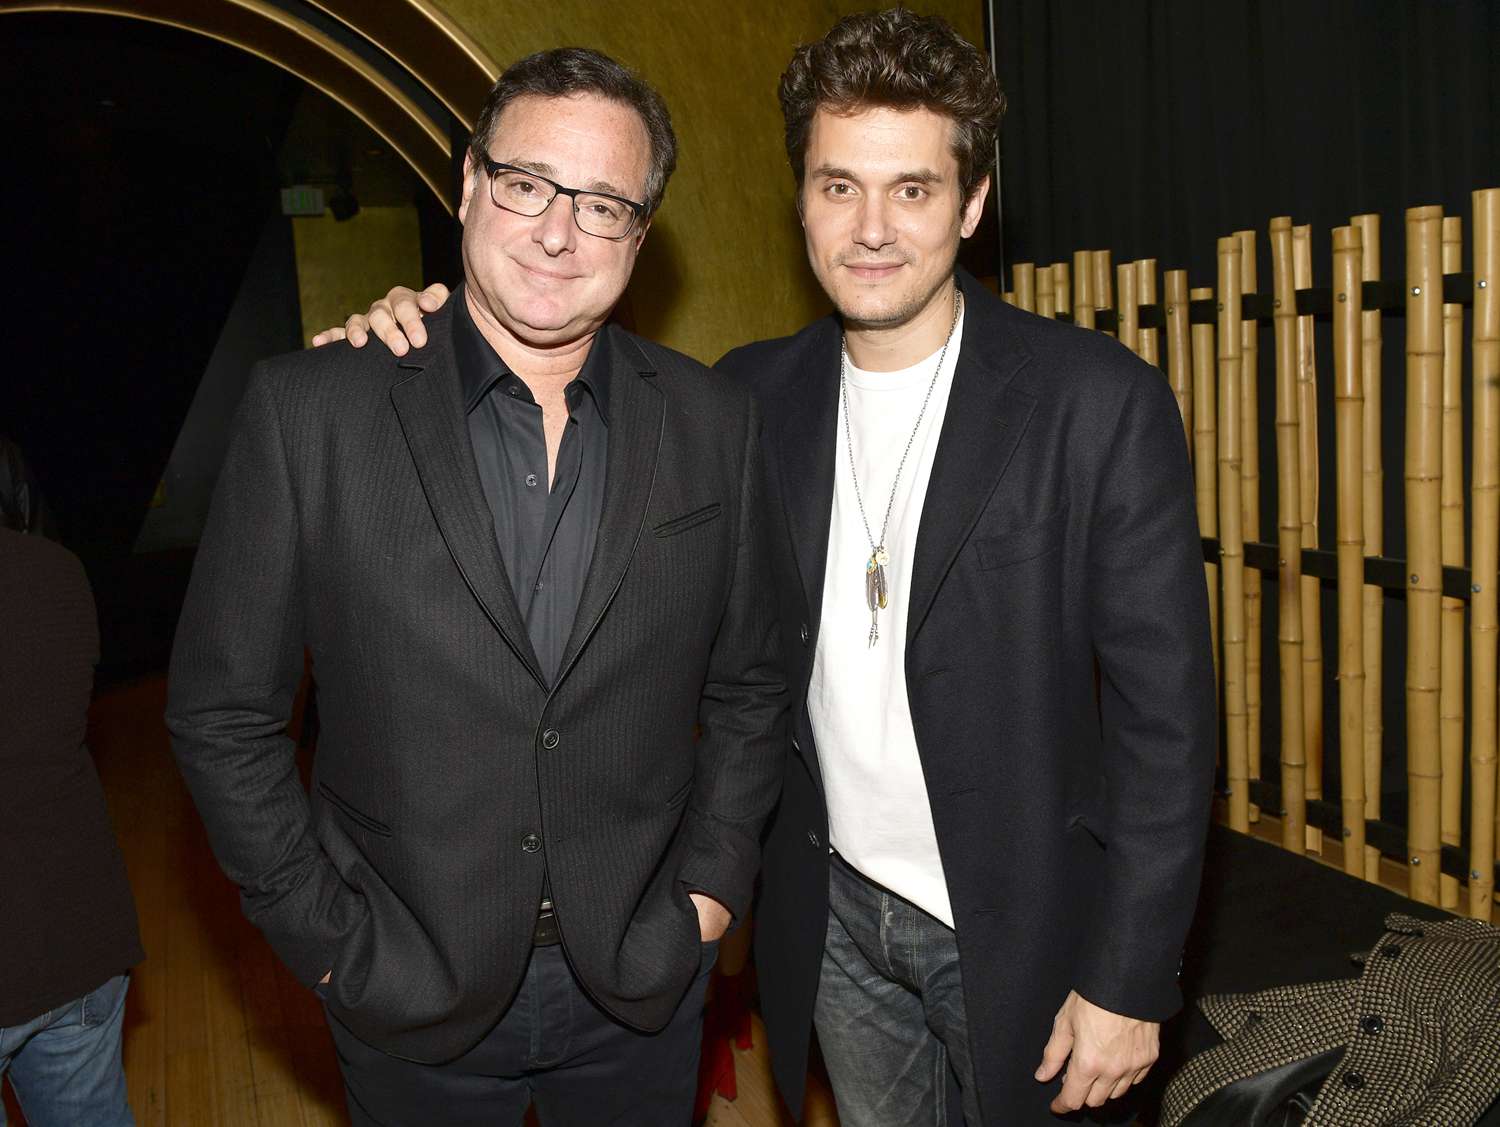 John Mayer paid for a private plane to fly Bob Saget to California after his death